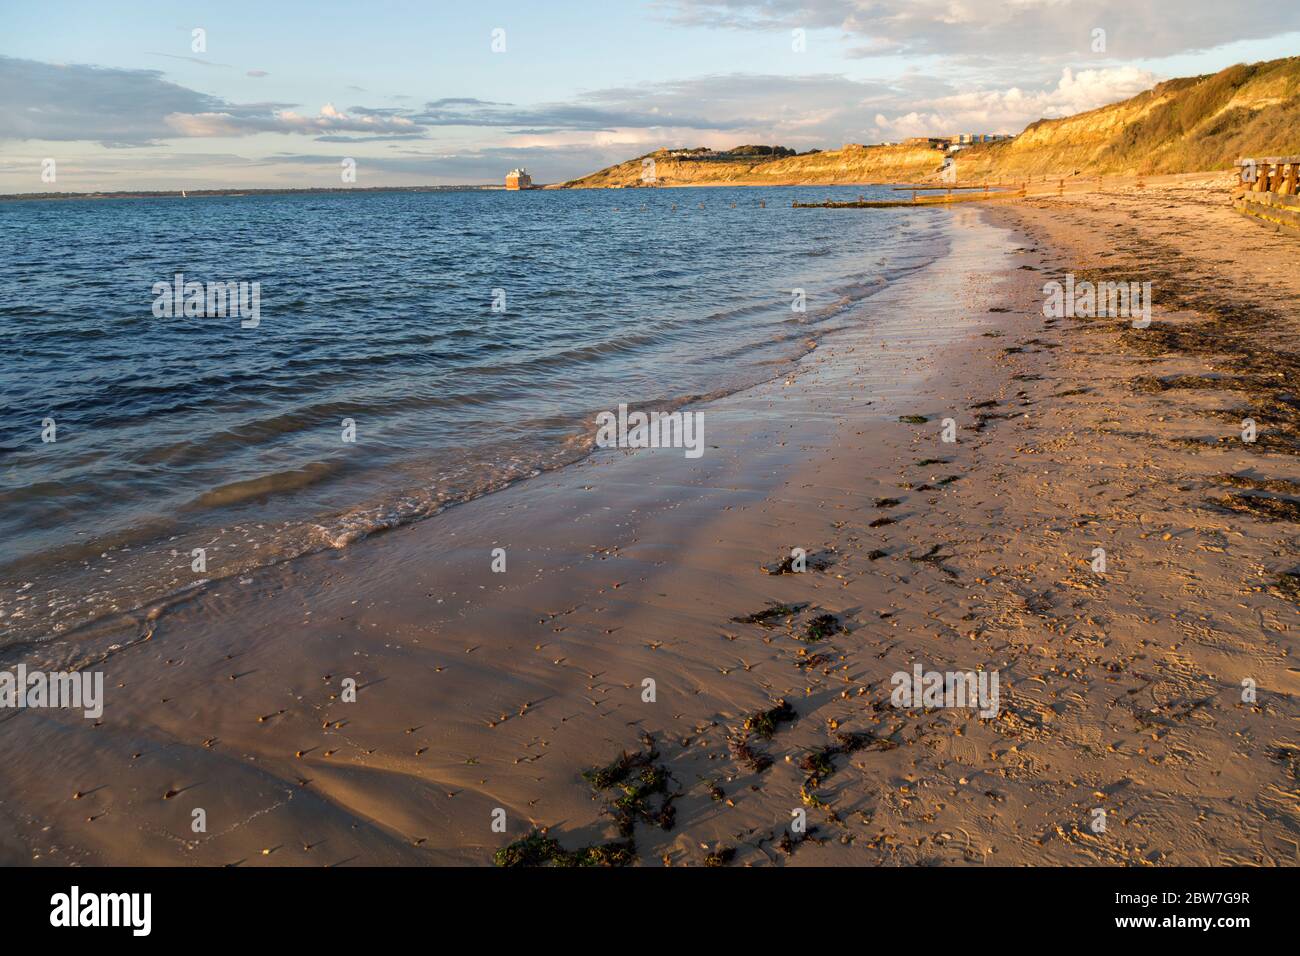 Beach at Colwell Bay with Fort Albert in the distance, Isle of Wight, England, UK Stock Photo